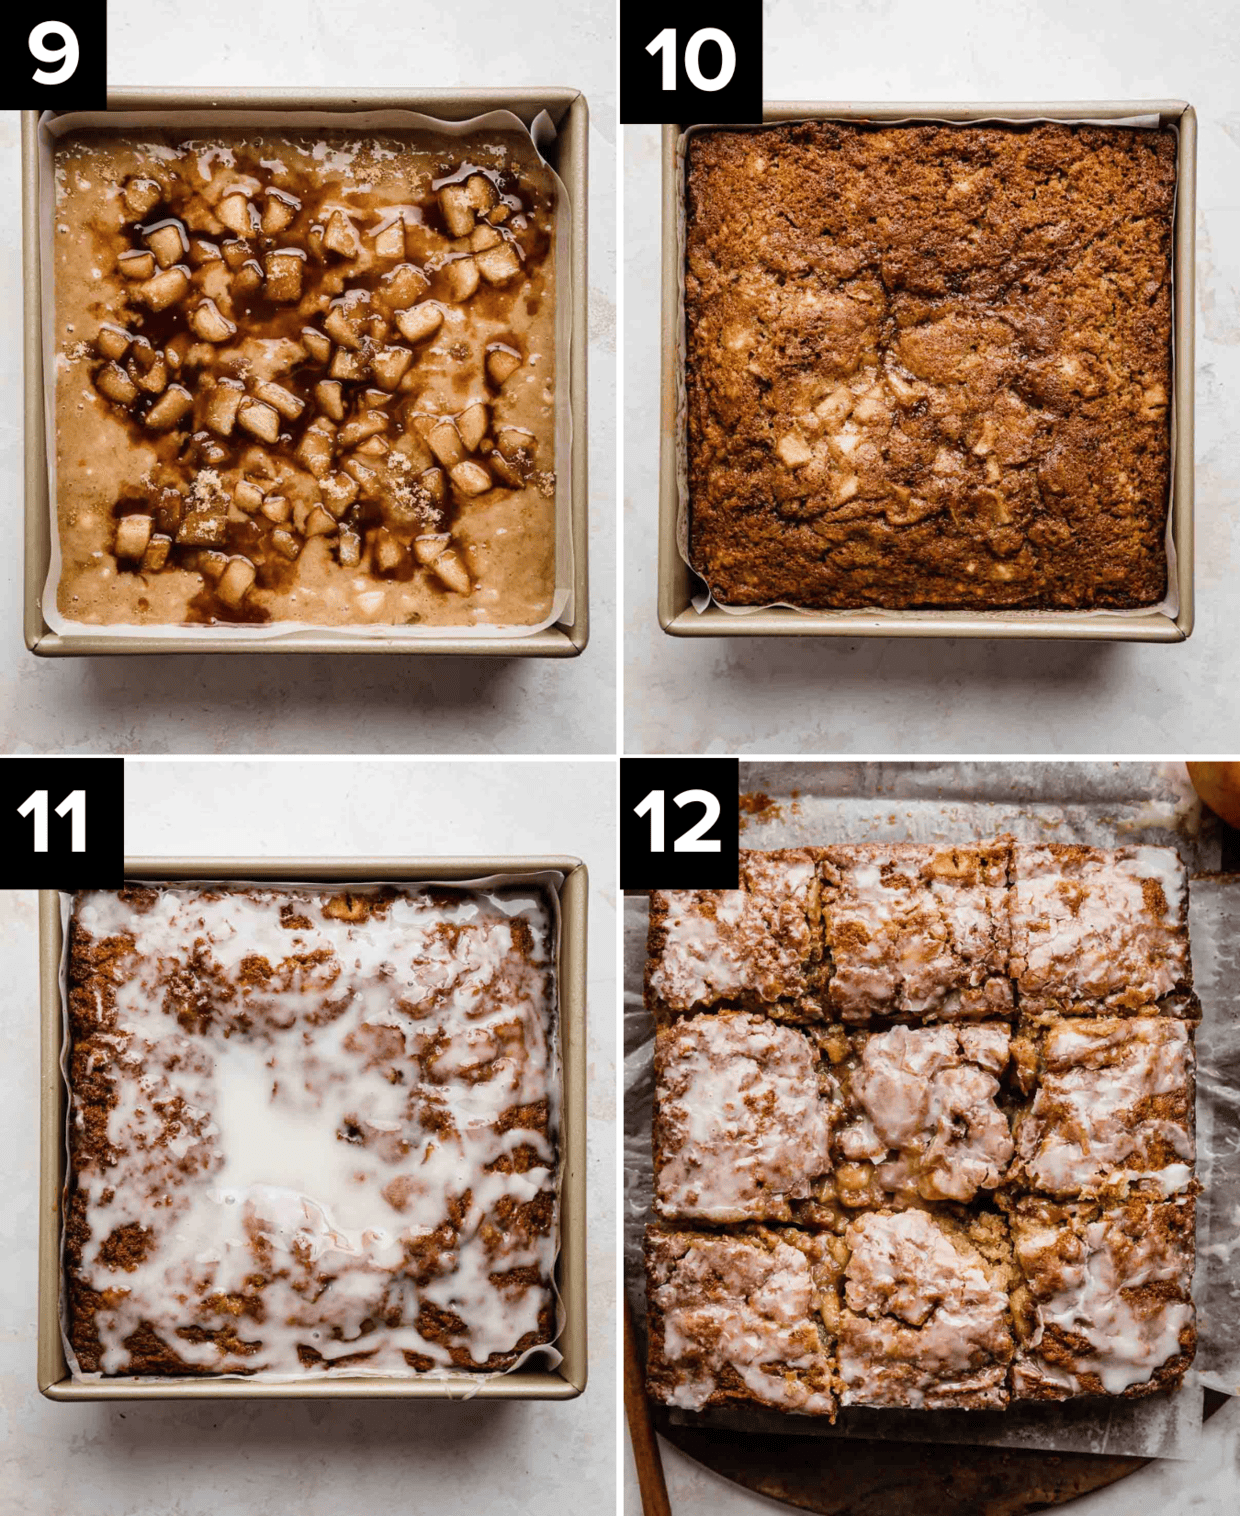 Four photos showing Apple Fritter Cake in square pan, showing the process of it being made, raw batter in pan, baked, then the Apple Fritter Cake topped with icing.